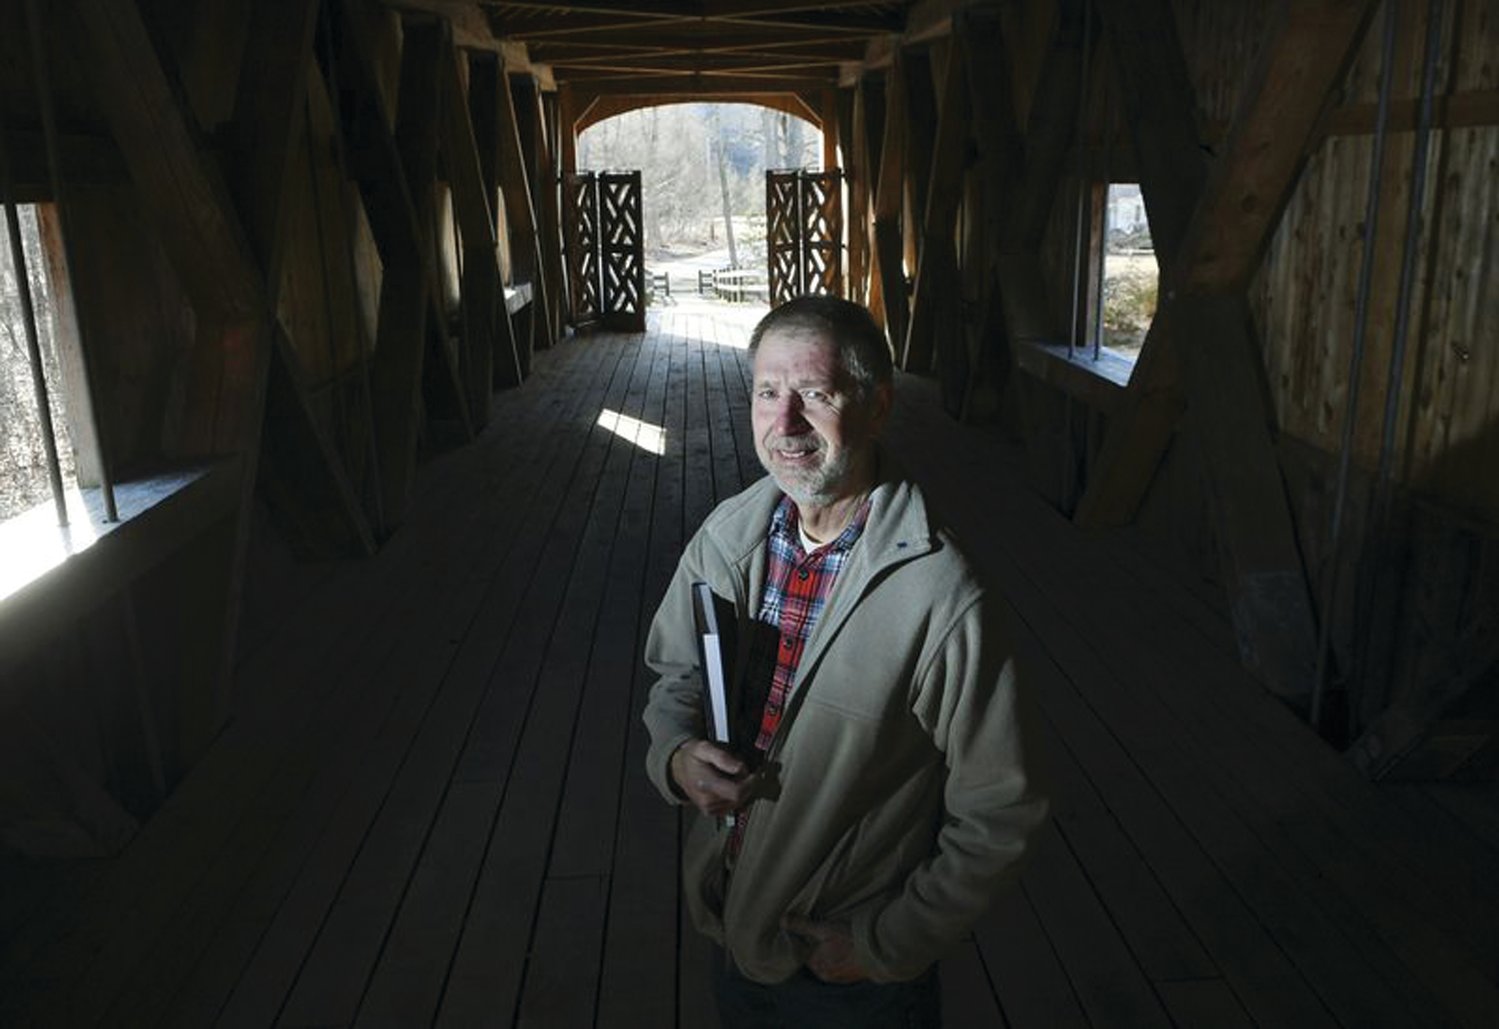 MEET THE AUTHOR: Martin Podskoch, author of “Rhode Island 39 Club” and “Rhode Island Conservation Corps Camps,” is pictured on Comstock’s Bridge in East Hampton, Connecticut.